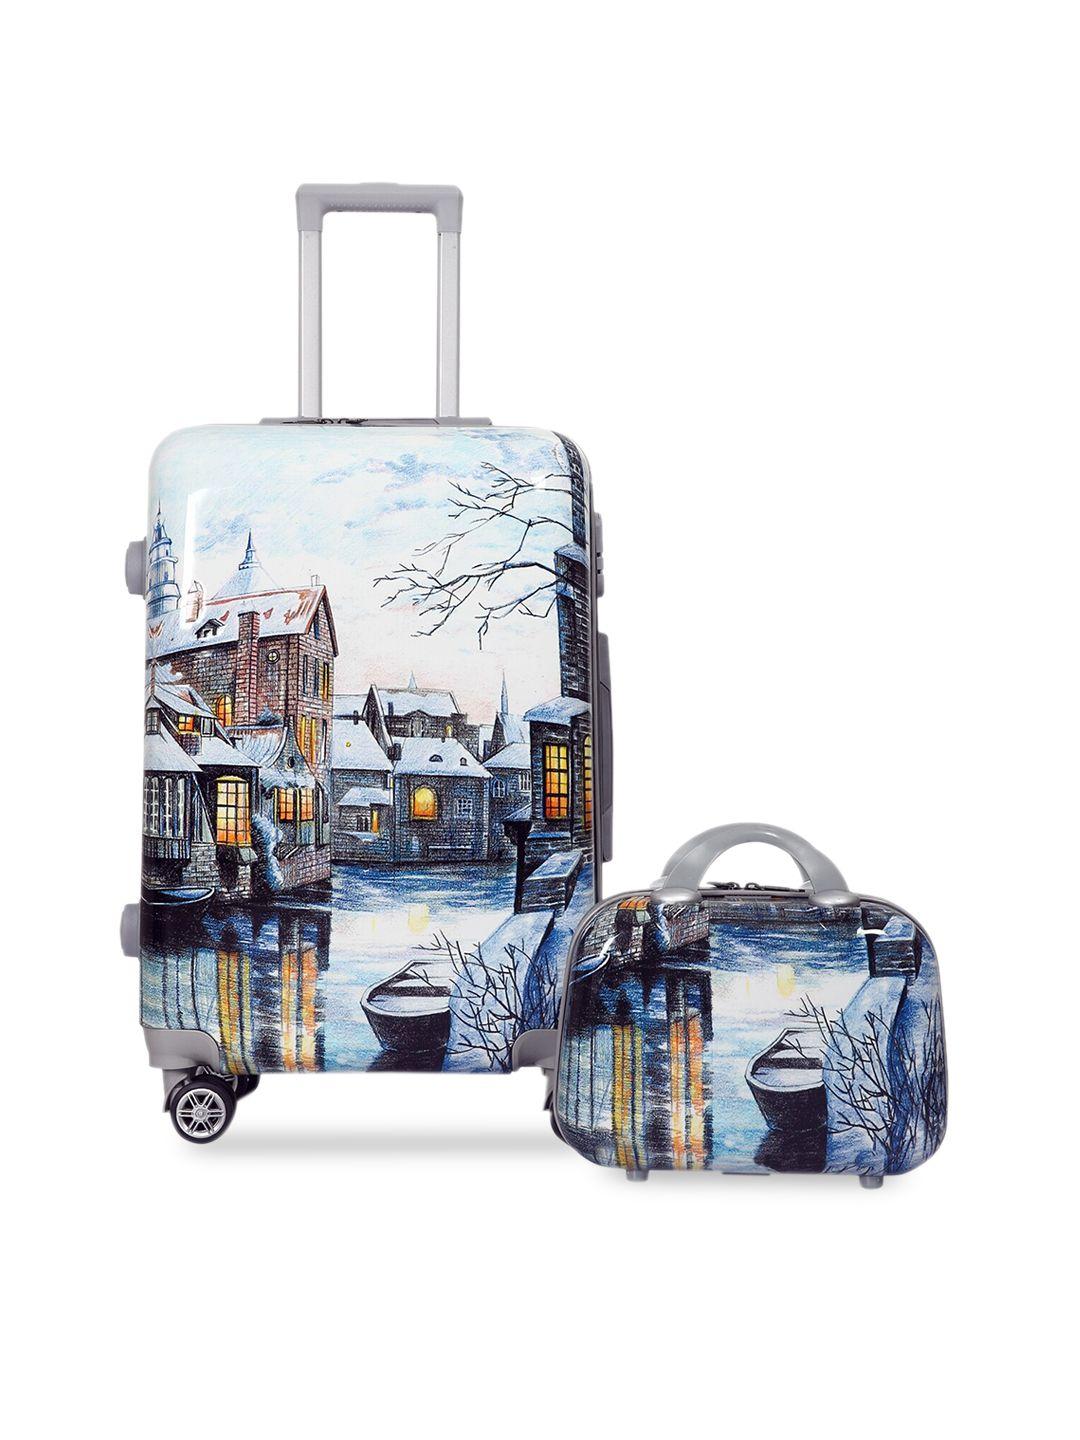 polo class set of 2 blue & white printed trolley bag with vanity bag